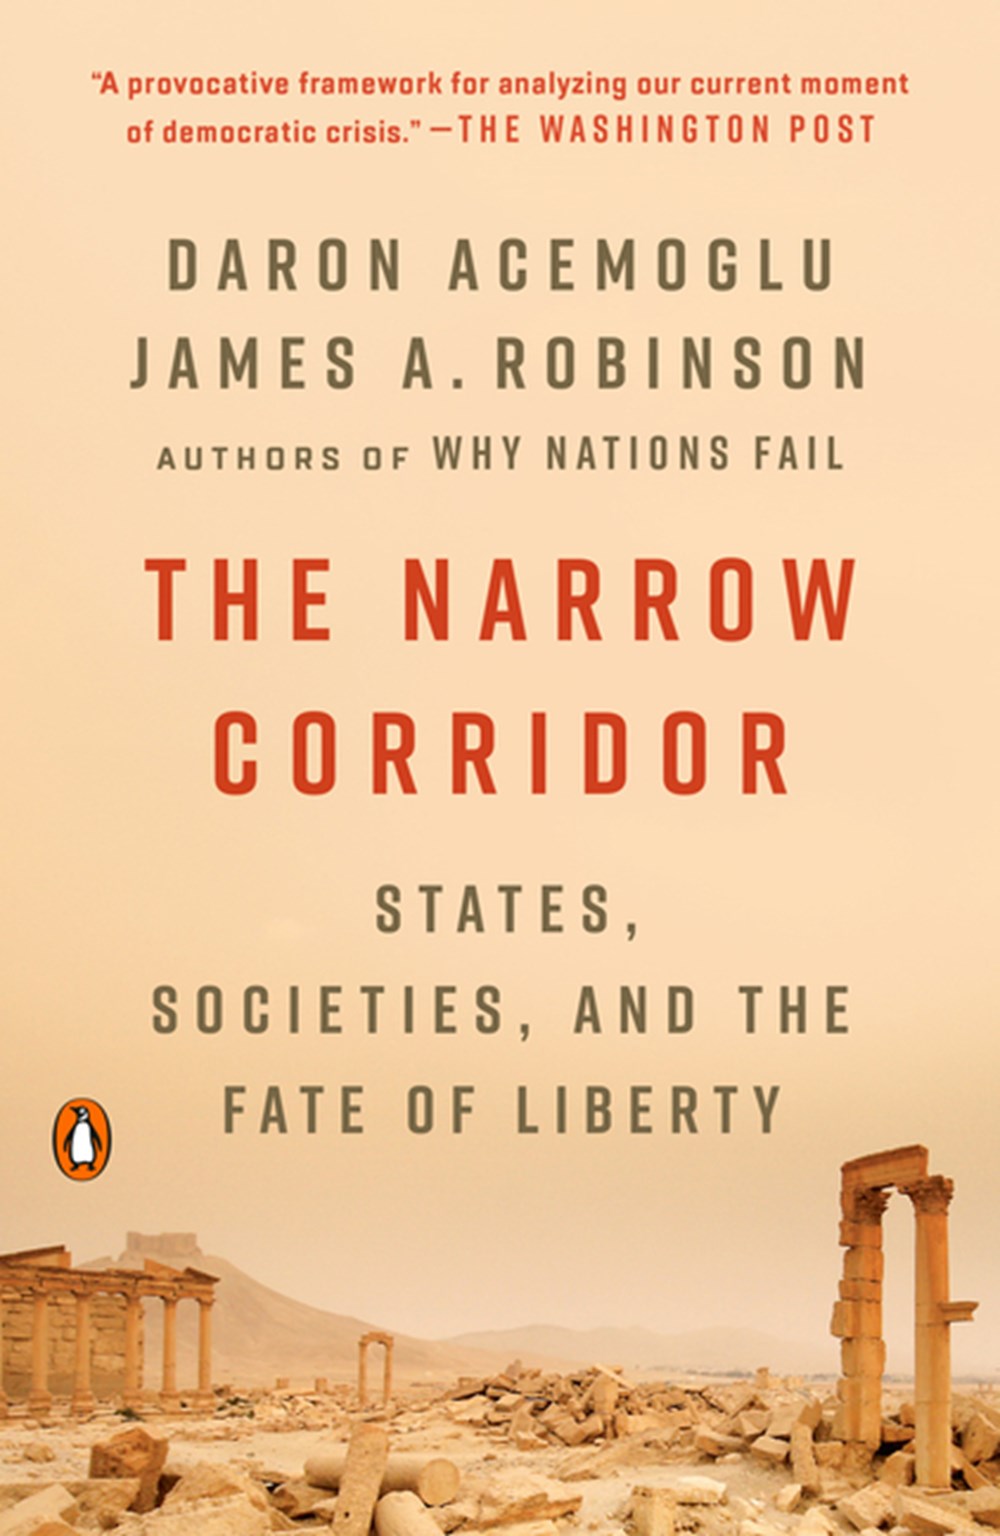 Narrow Corridor States, Societies, and the Fate of Liberty